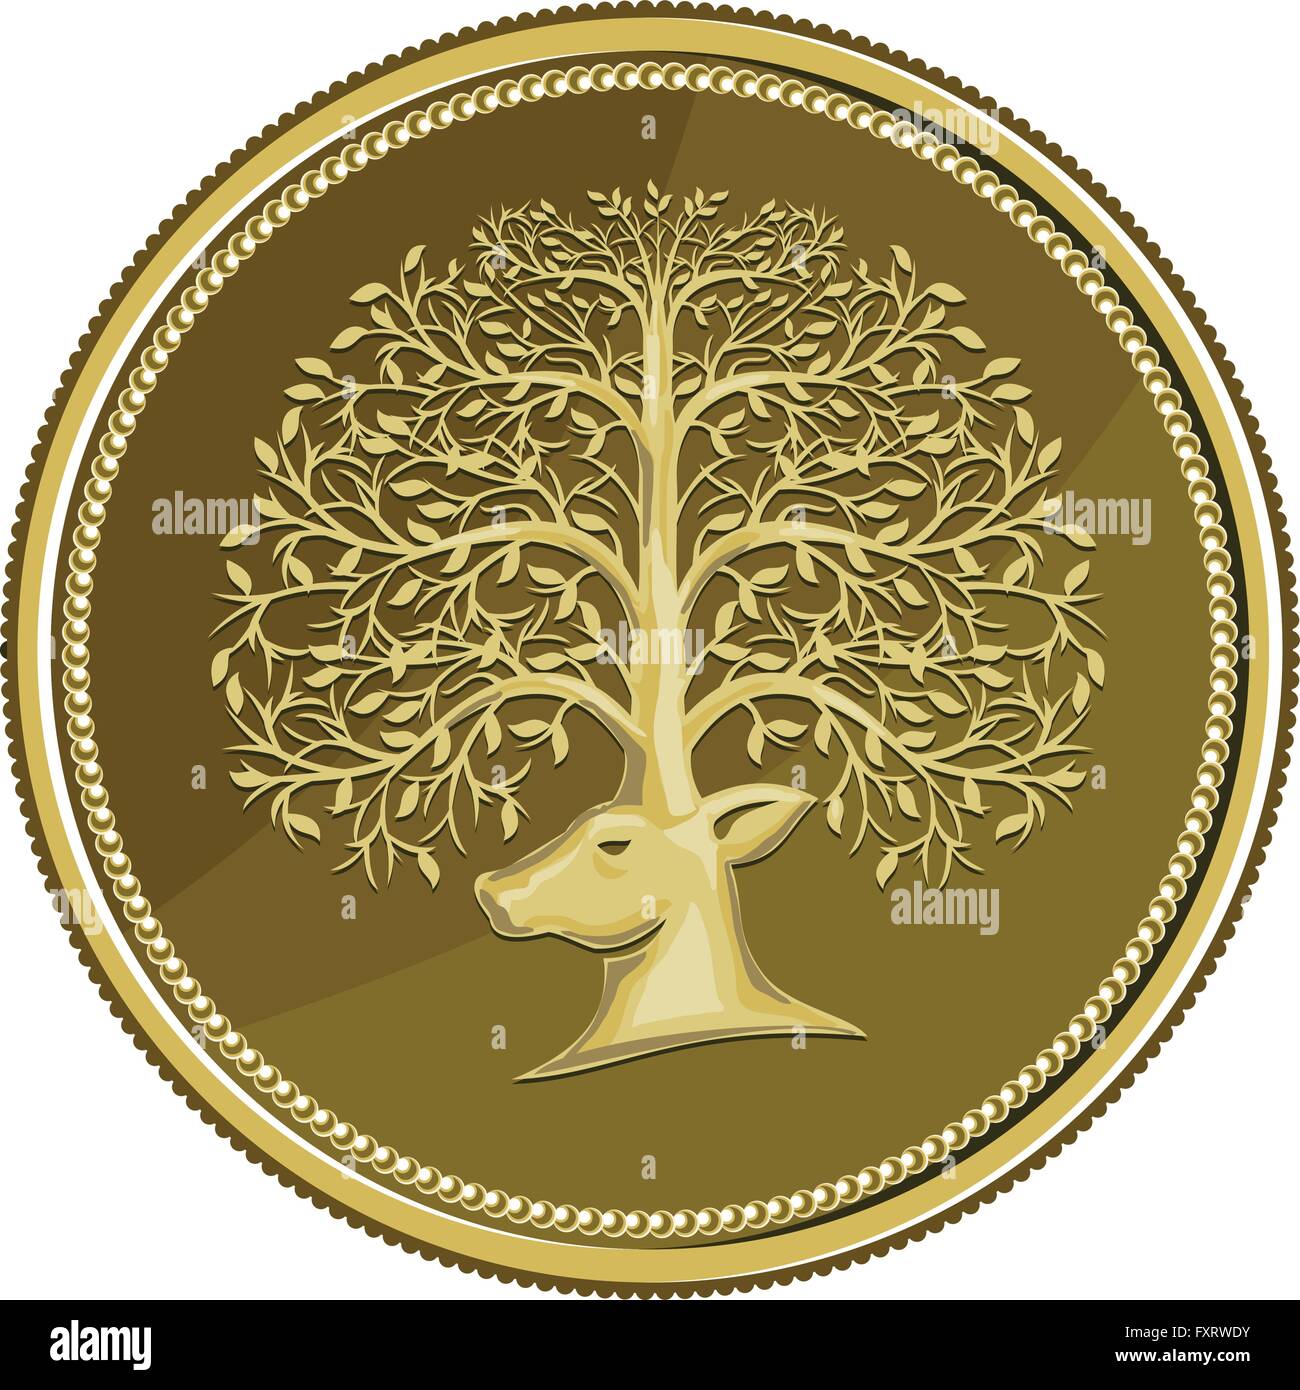 Illustration of a deer head viewed from the side with antler made of trees branches and leaves set inside gold coin medallion done in retro style. Stock Vector